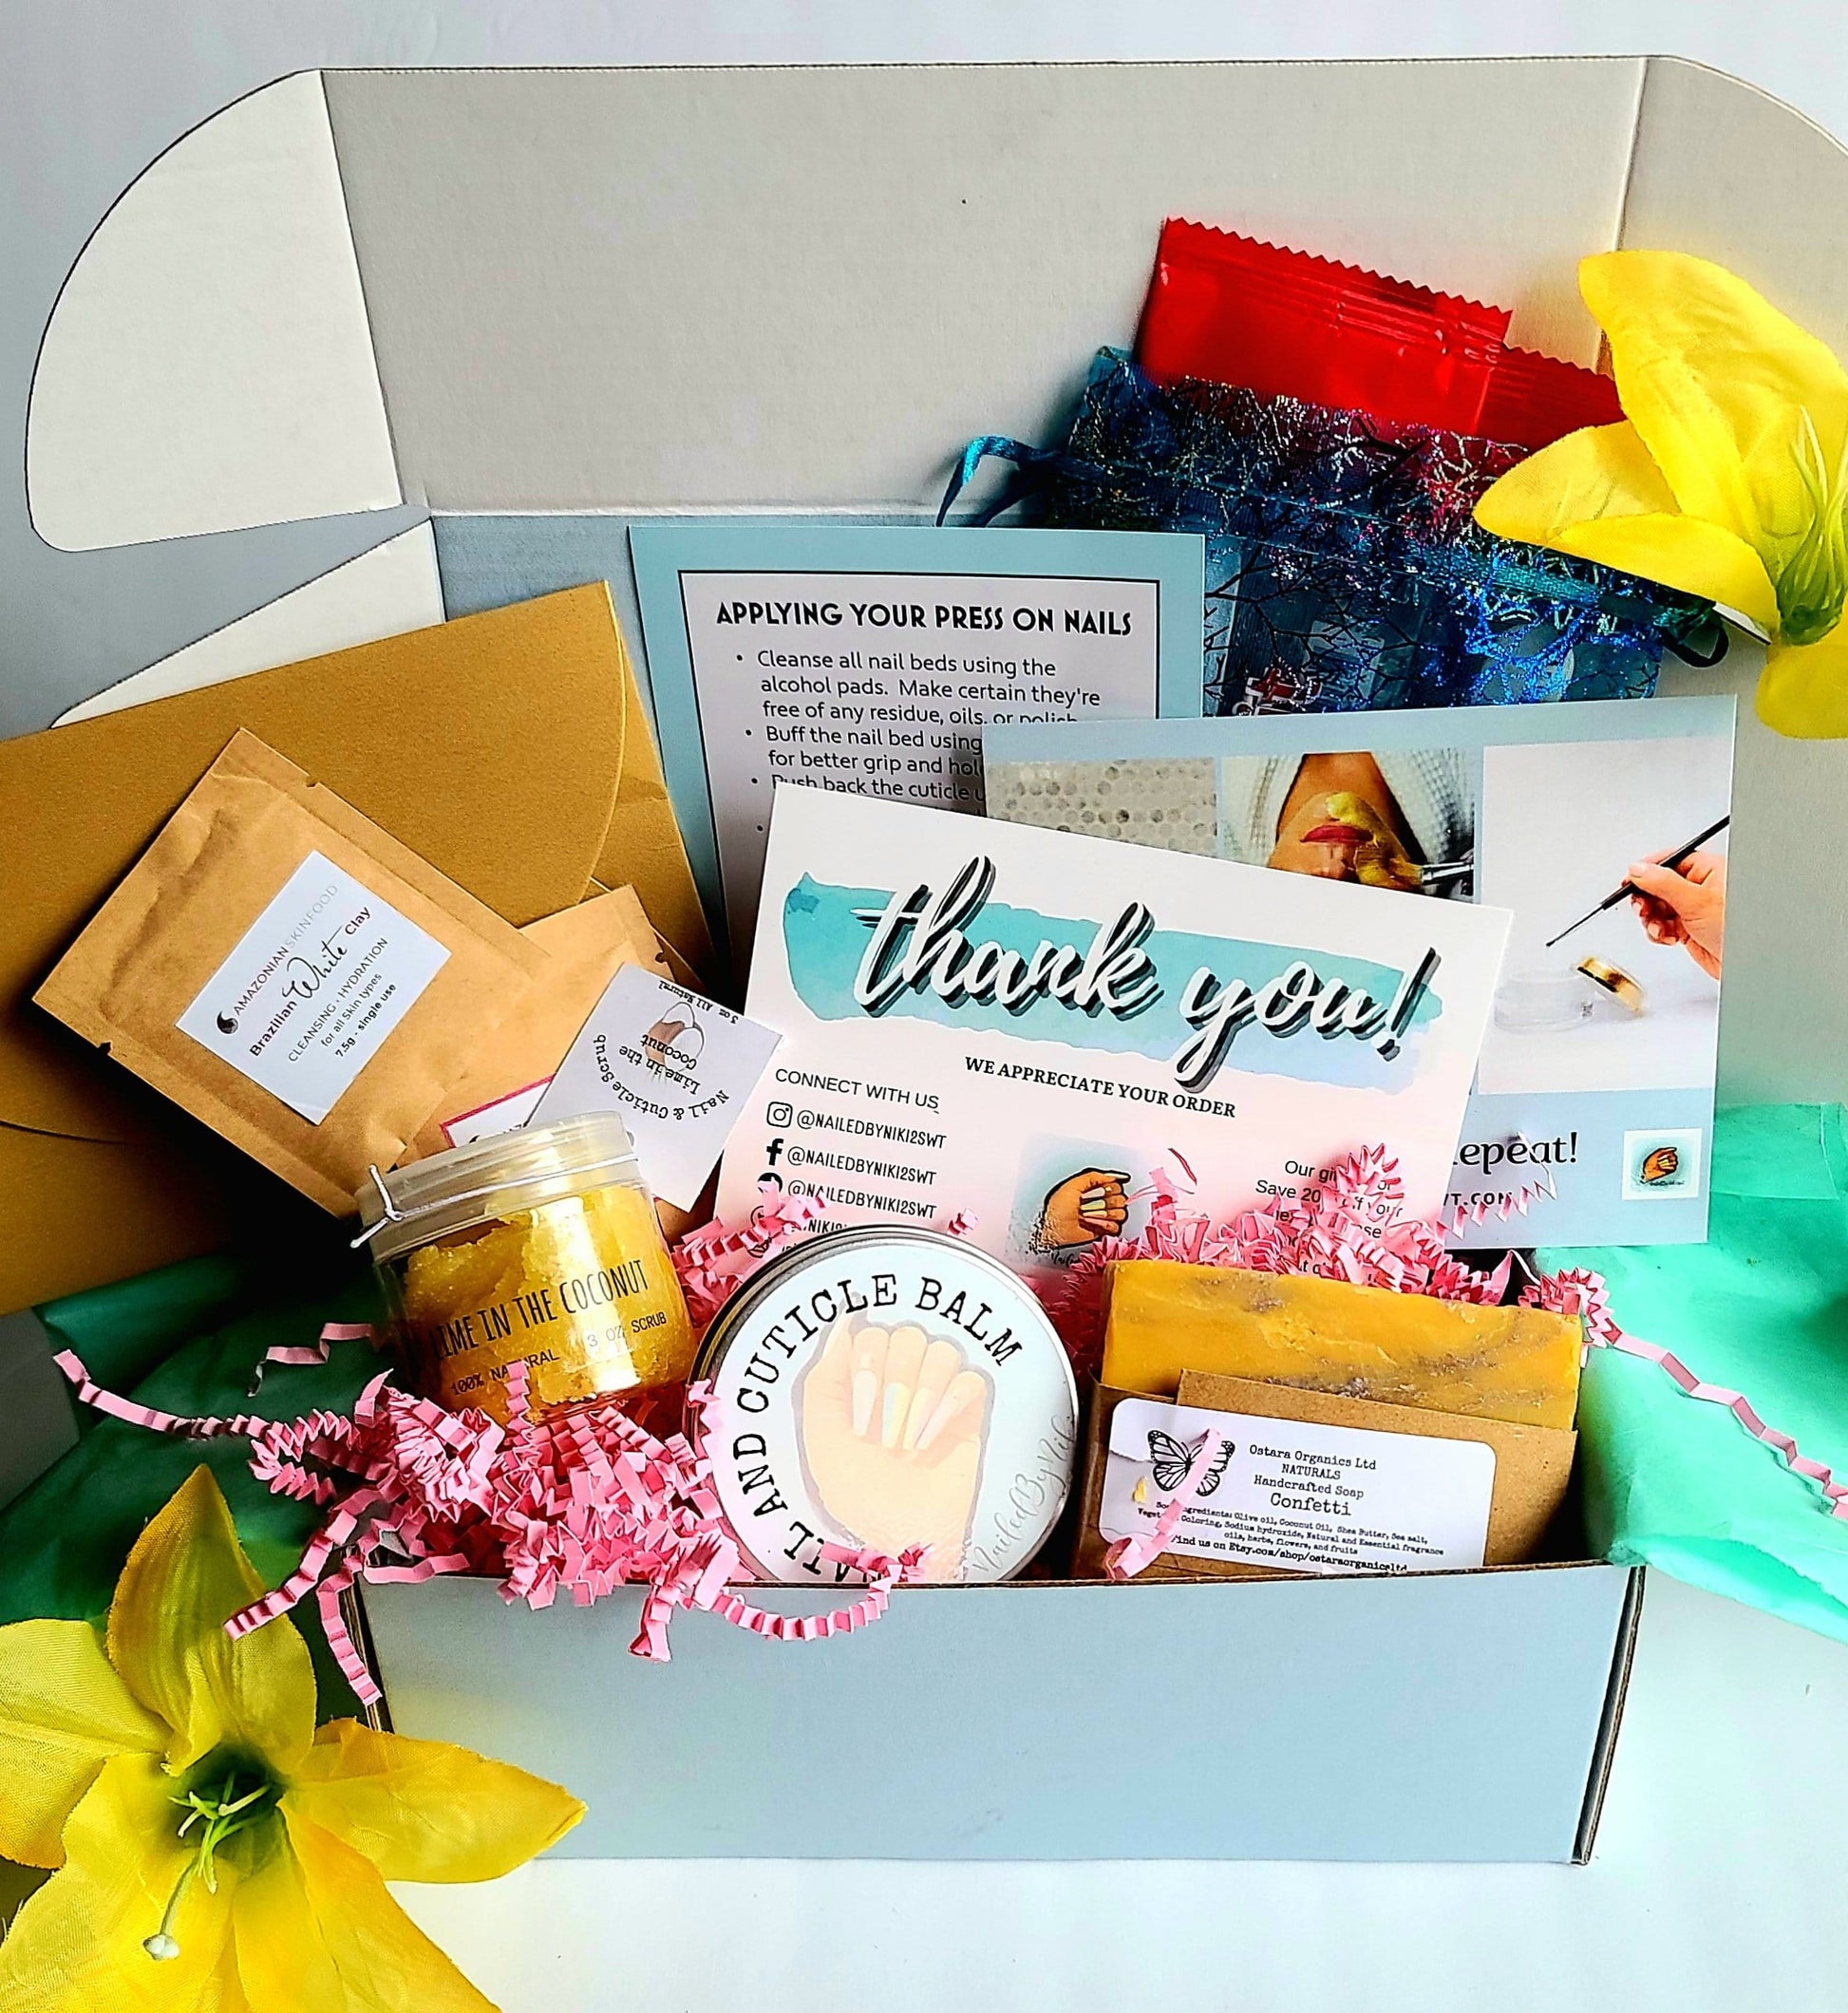 NailedByNiki2swt Get Nailed Monthly Box - April Press on Nails Self Care Accessories